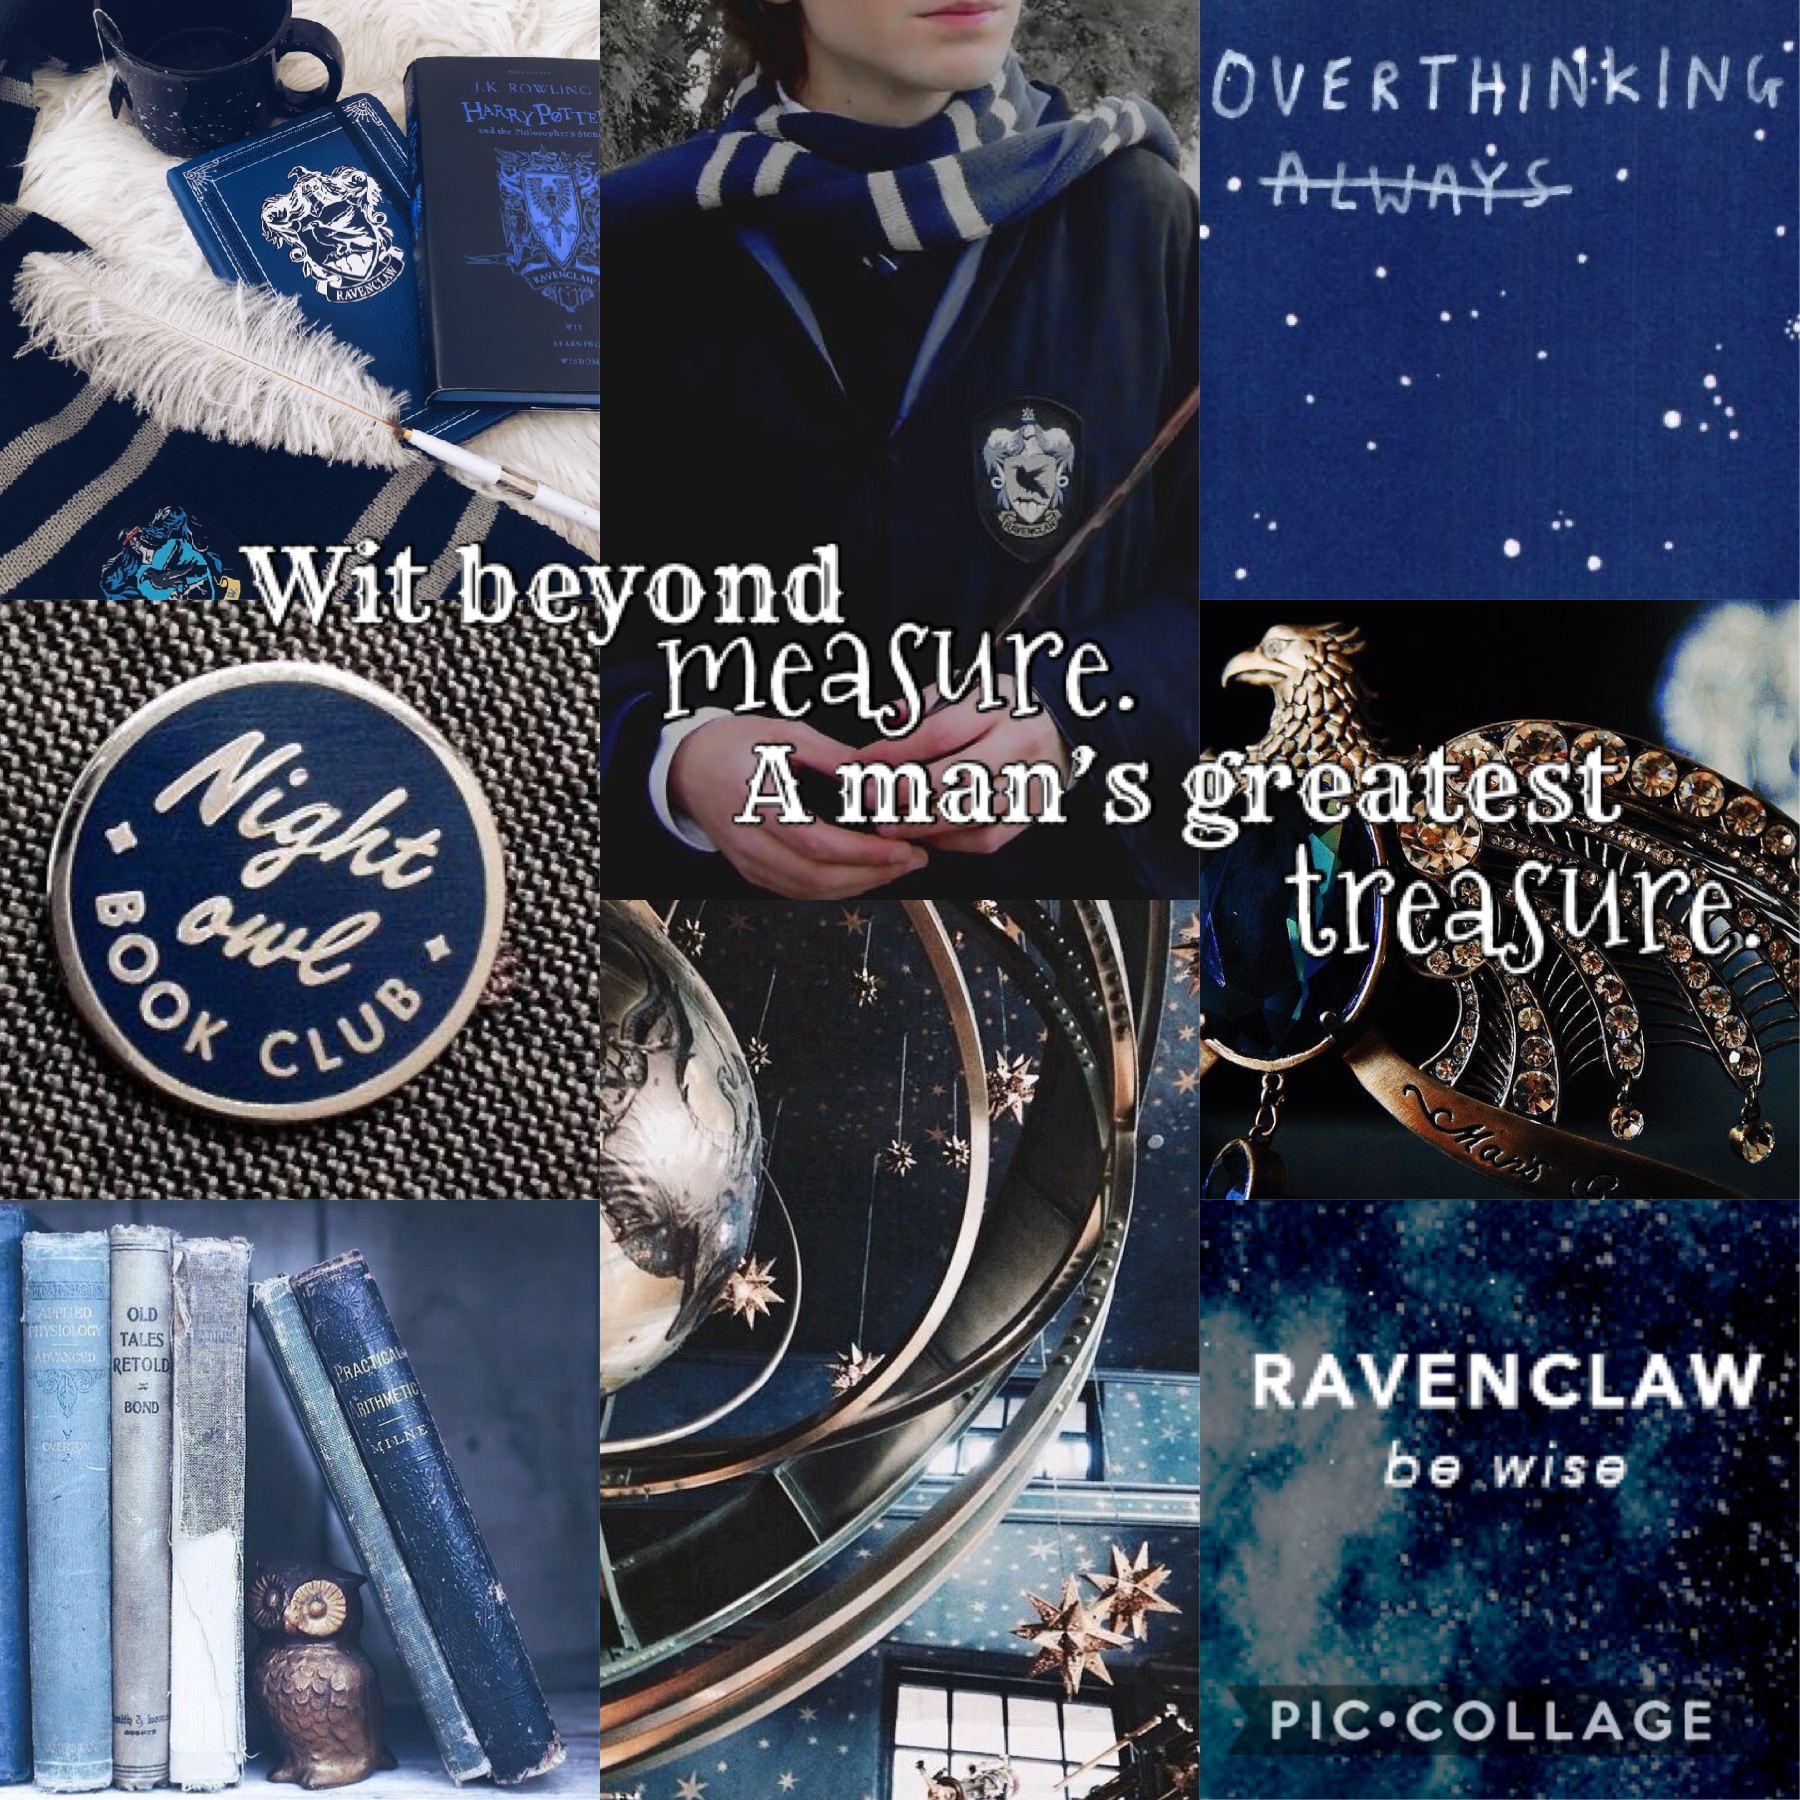 What’s your Hogwarts House? I’m Ravenclaw 💙🤍